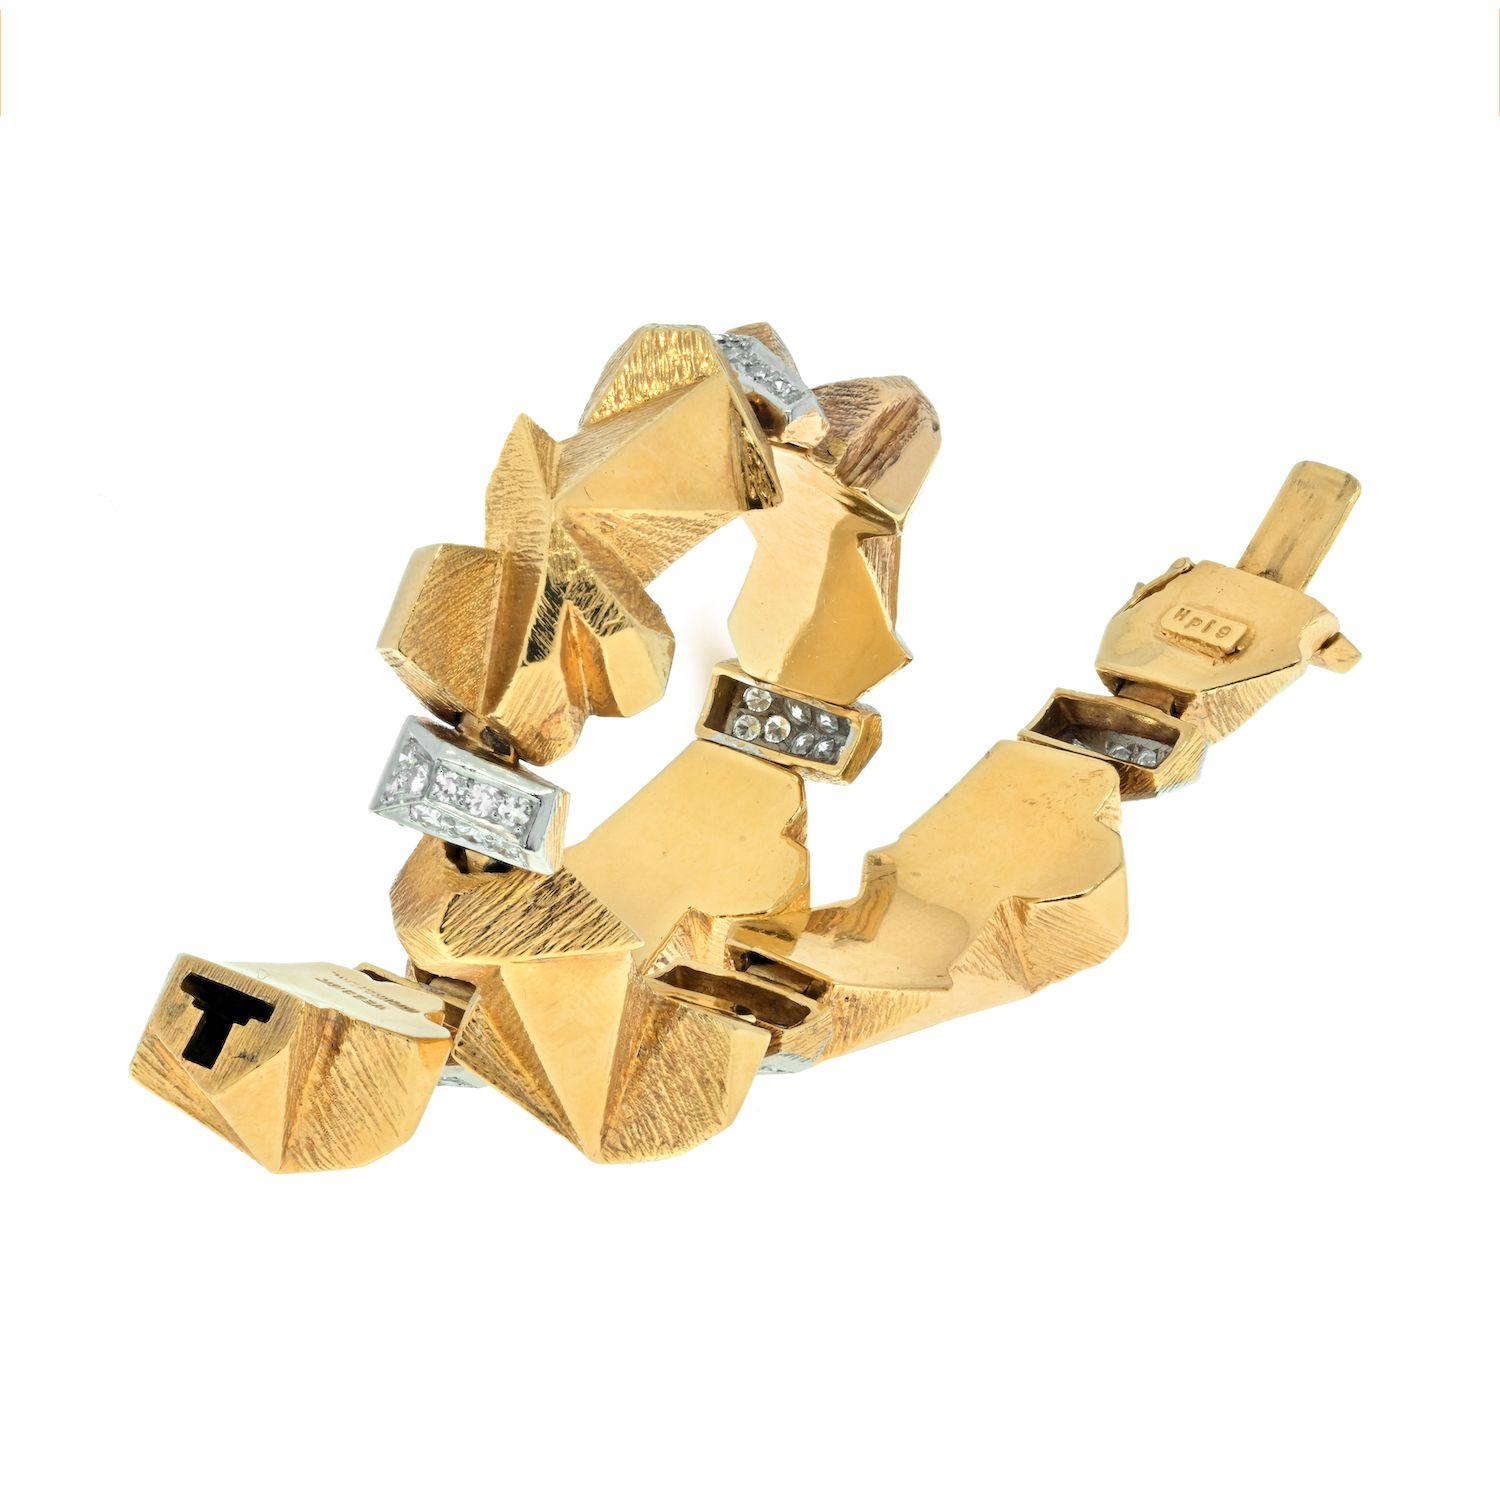 Very unusual bracelet by David Webb that is crafted in a very articulated manner, featuring gold nuggets or 